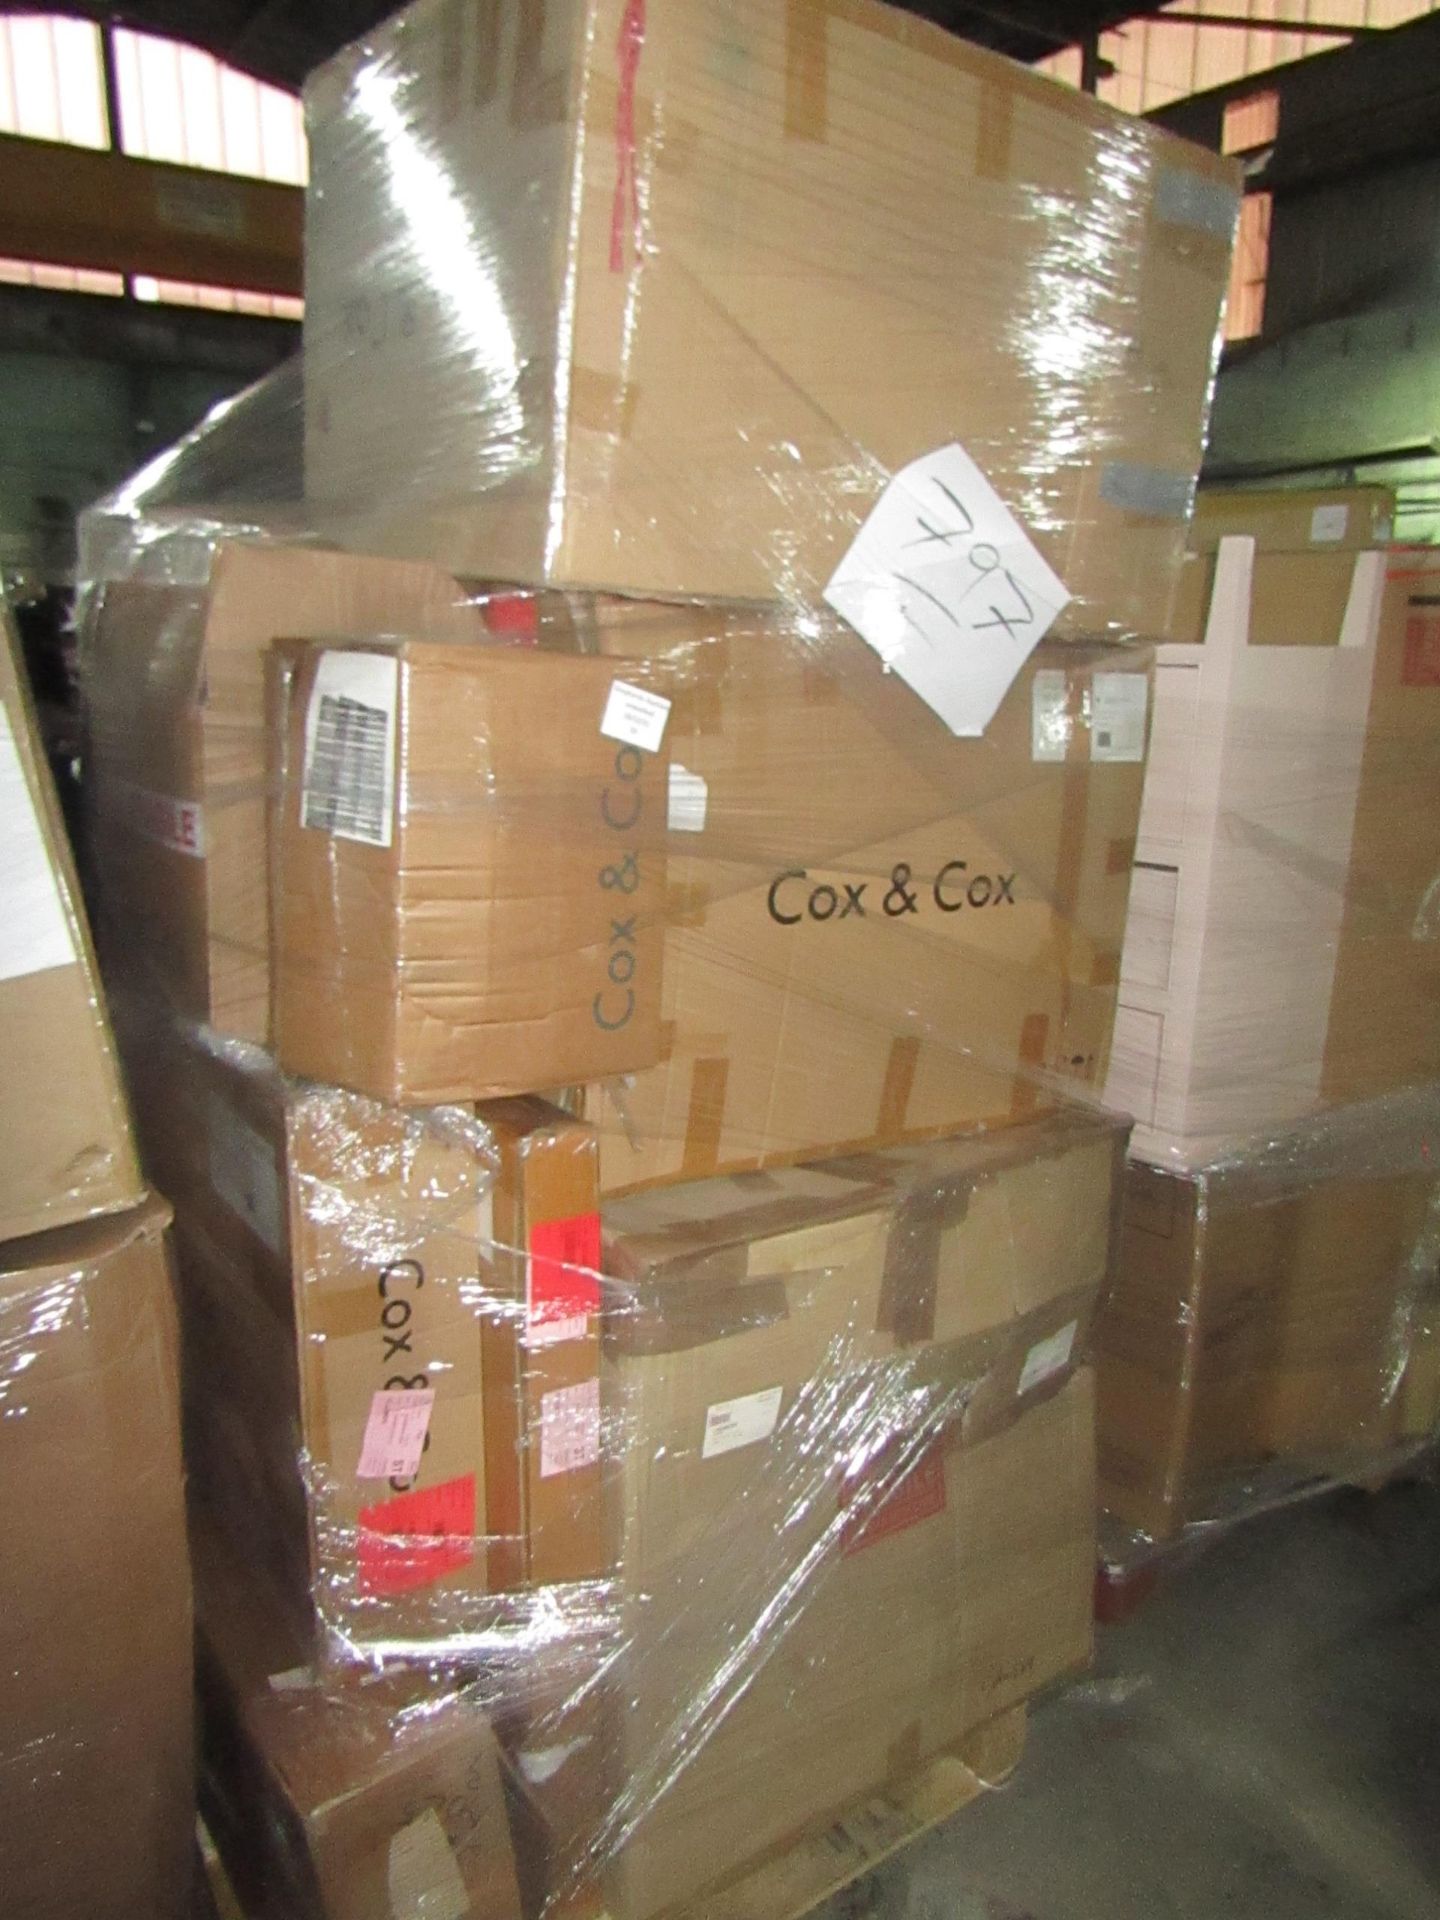 Mixed pallet of Cox & Cox customer returns to include 8 items of stock with a total RRP of